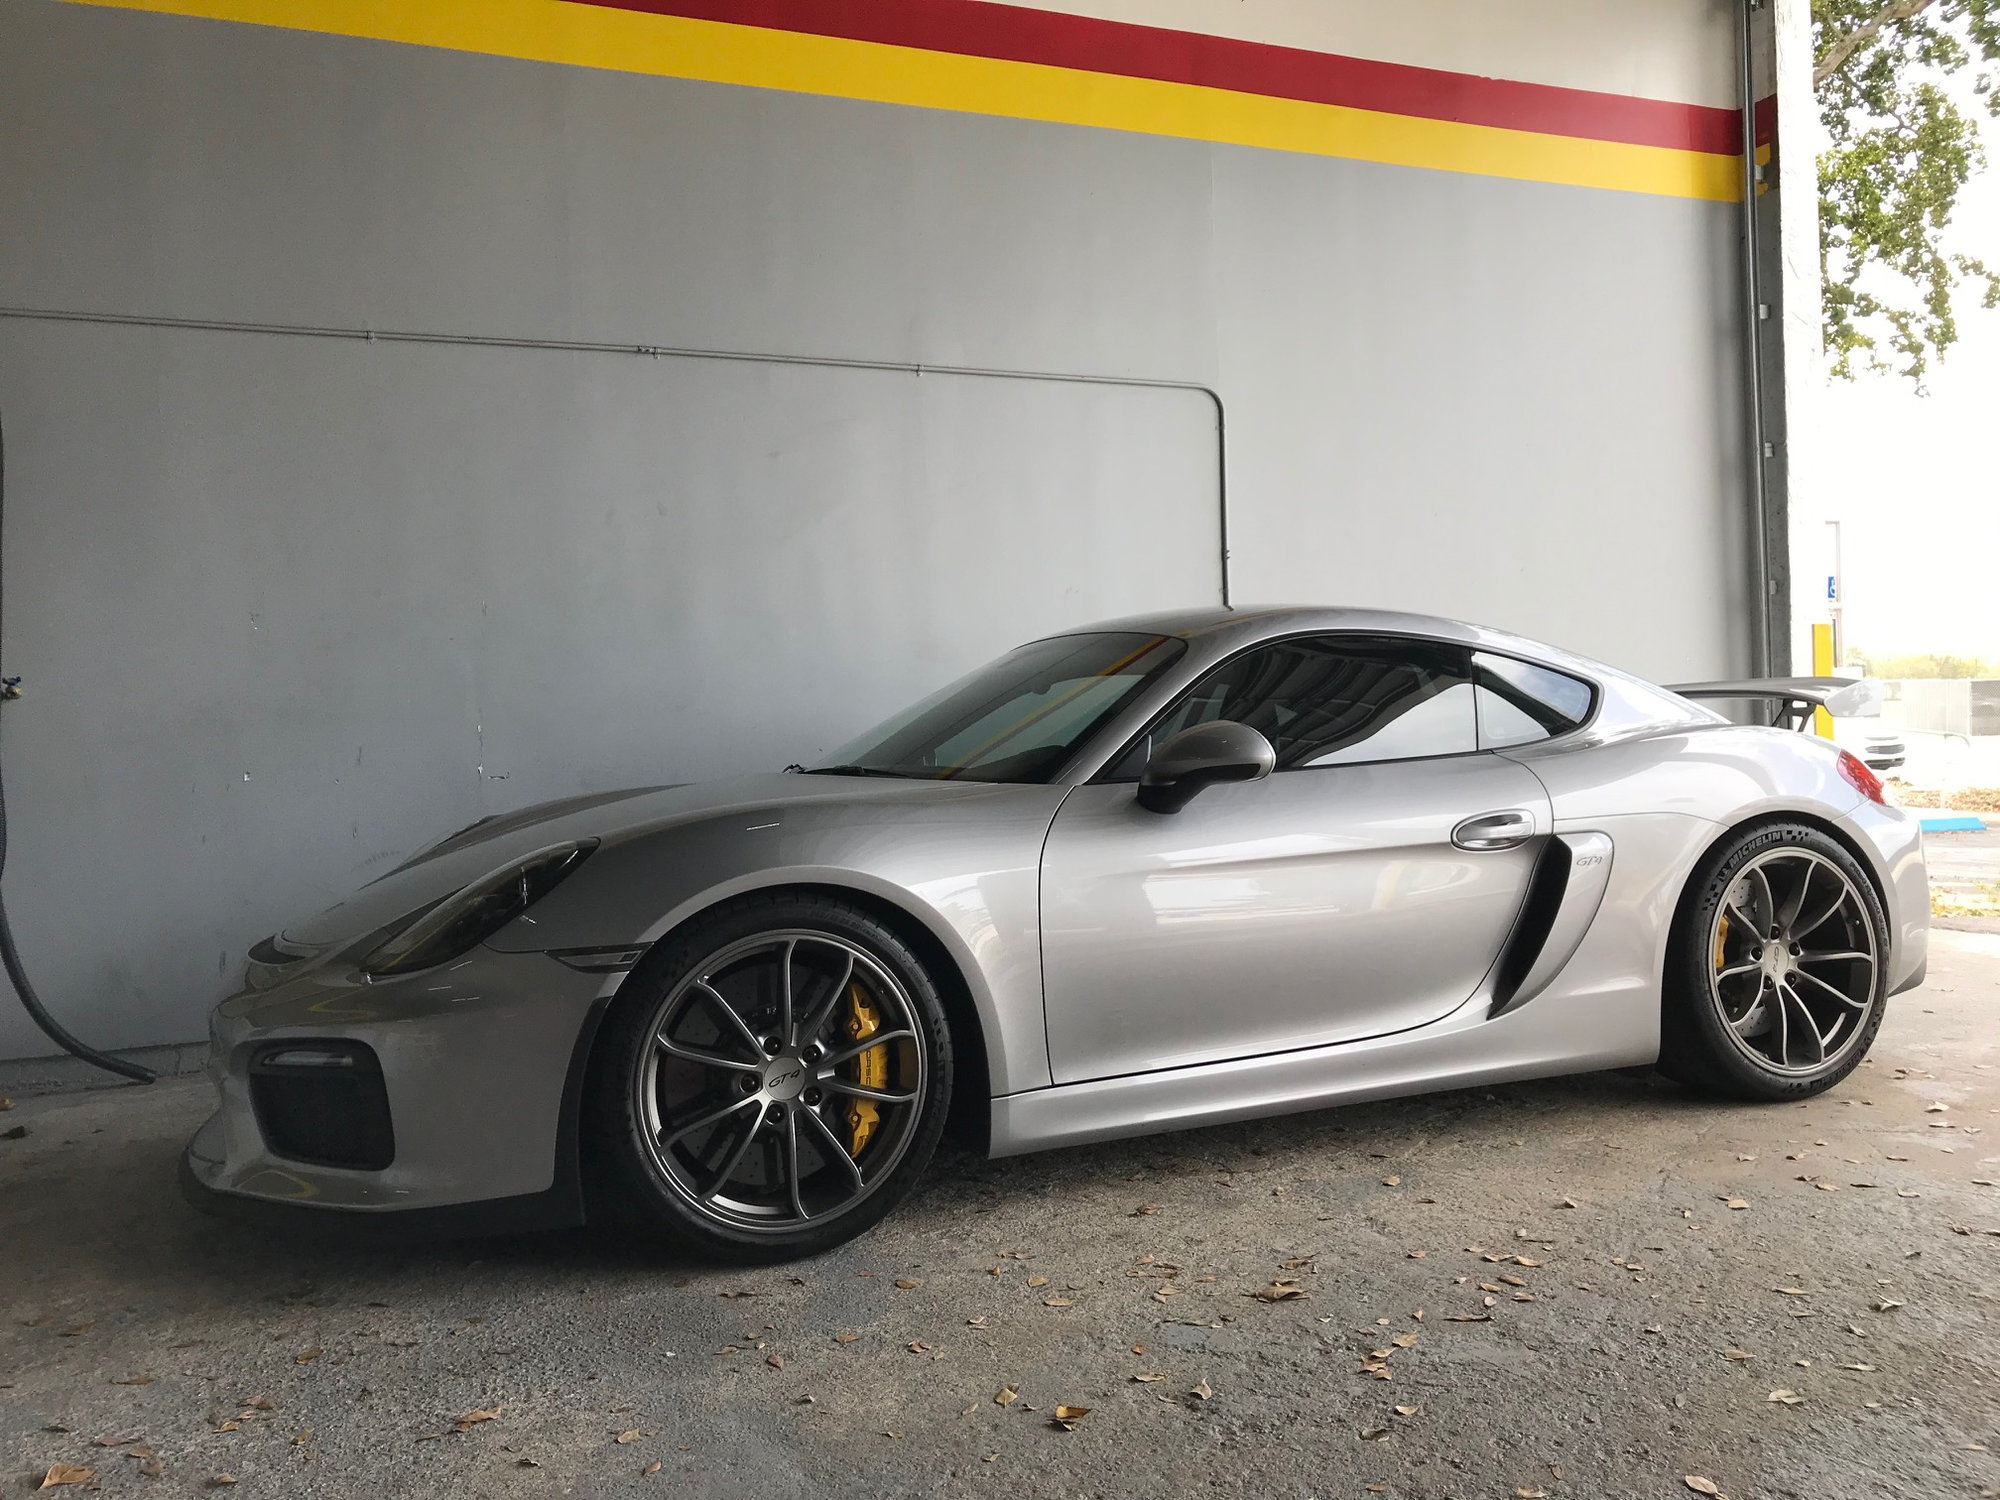 2016 Porsche Cayman GT4 - 2016 Porsche GT4 - Must sell by 3/23 - Used - VIN WP0AC2A87GK197646 - 23,272 Miles - 6 cyl - 2WD - Manual - Coupe - Silver - Fort Lauderdale, FL 33309, United States